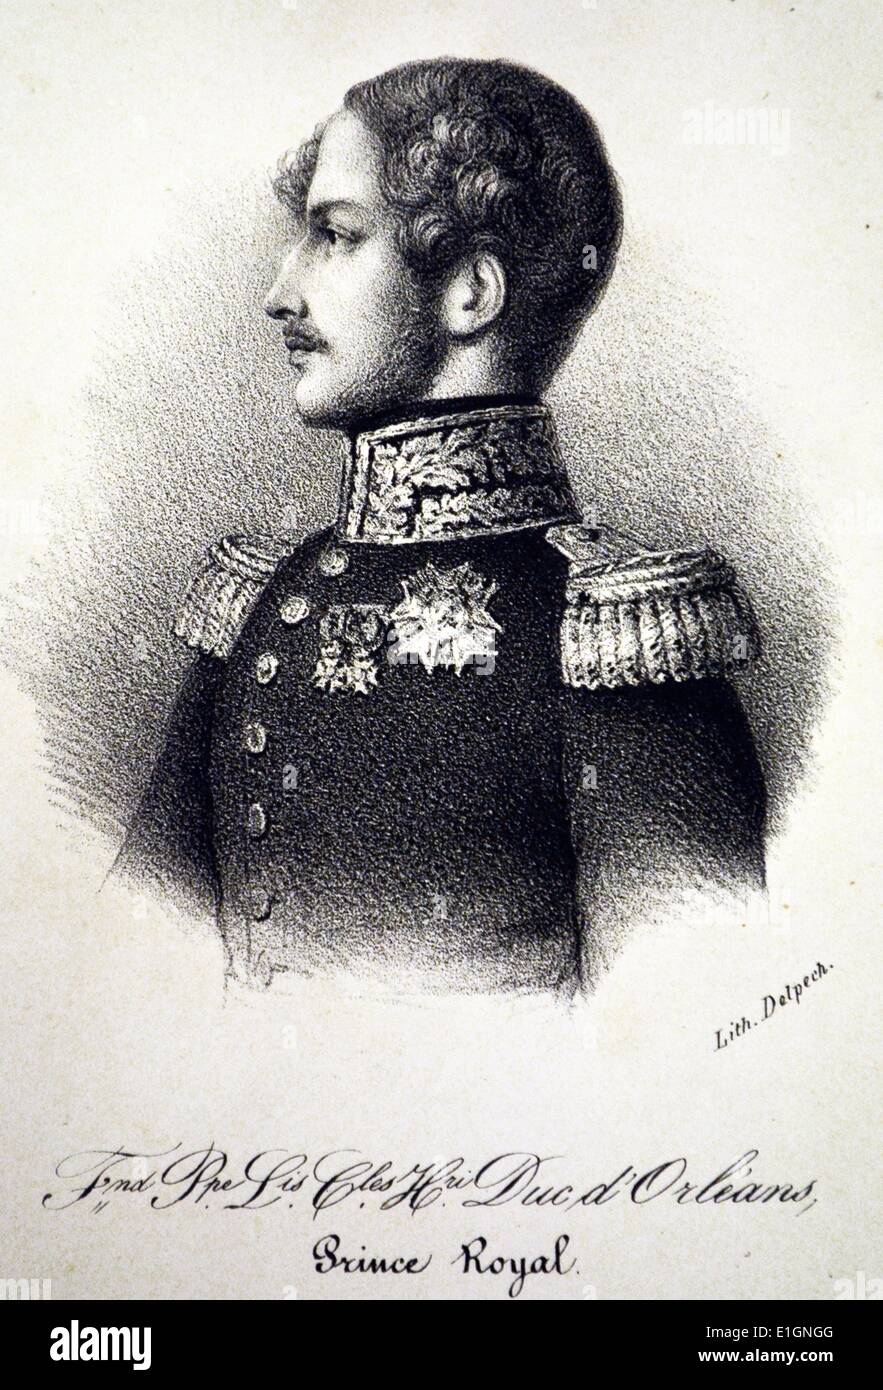 Ferdinand Philippe of Orleans, Prince Royal (1810-1842), eldest son of Louis Philippe I of France. Lithograh, Paris, c1840. Stock Photo